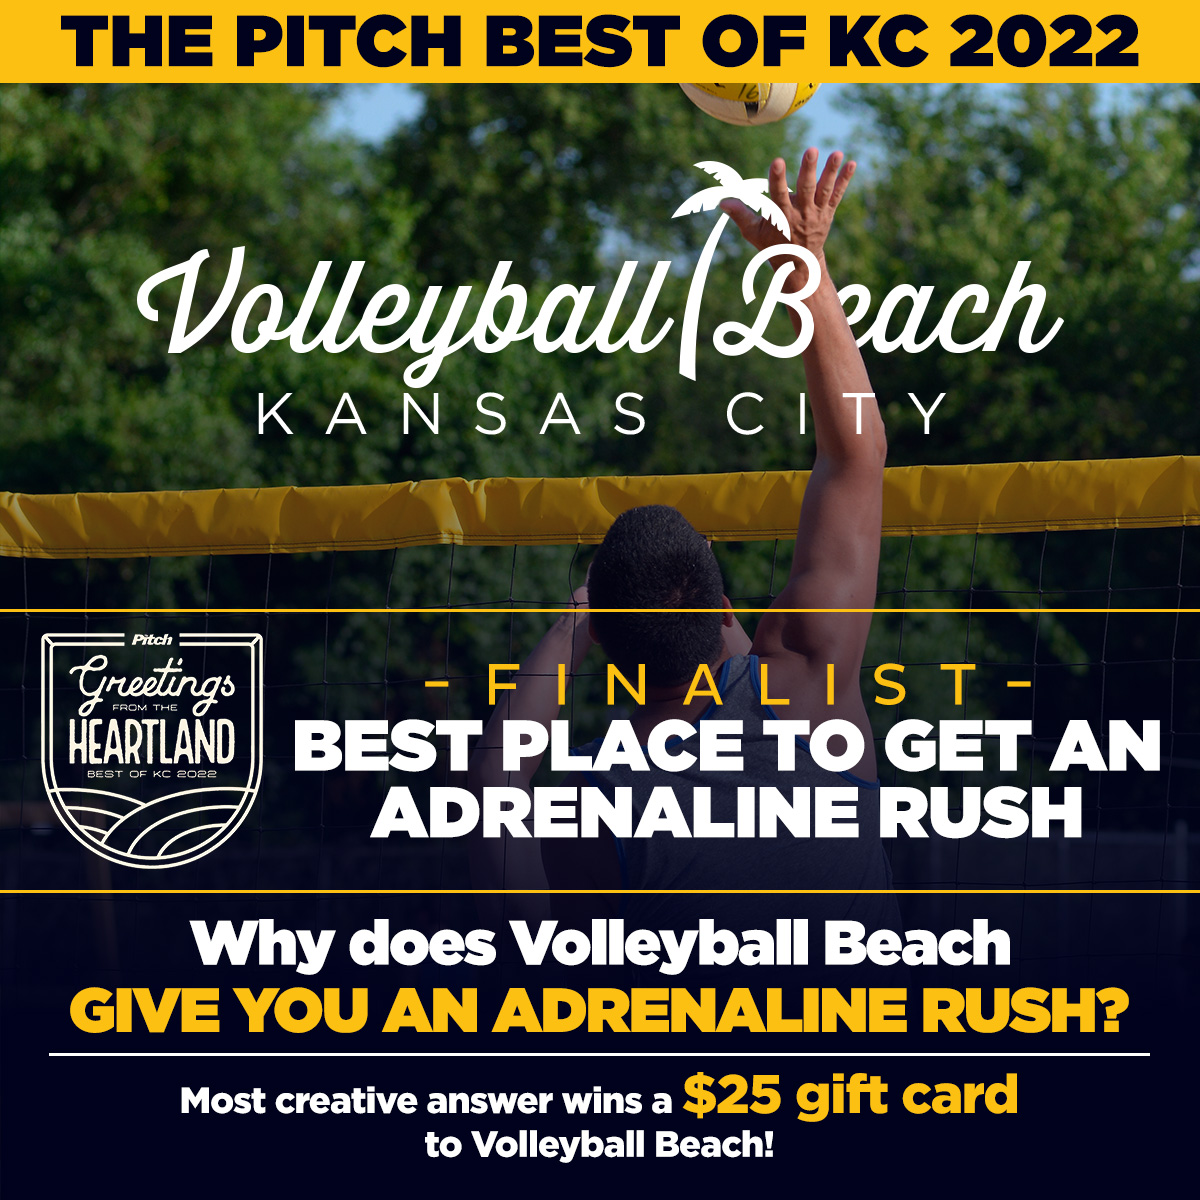 Why does Volleyball Beach give YOU an adrenaline rush?! Reply to let us know, most creative answer wins a $25 gift card to VBB!

#BestofKC #VolleyballBeach #KansasCity